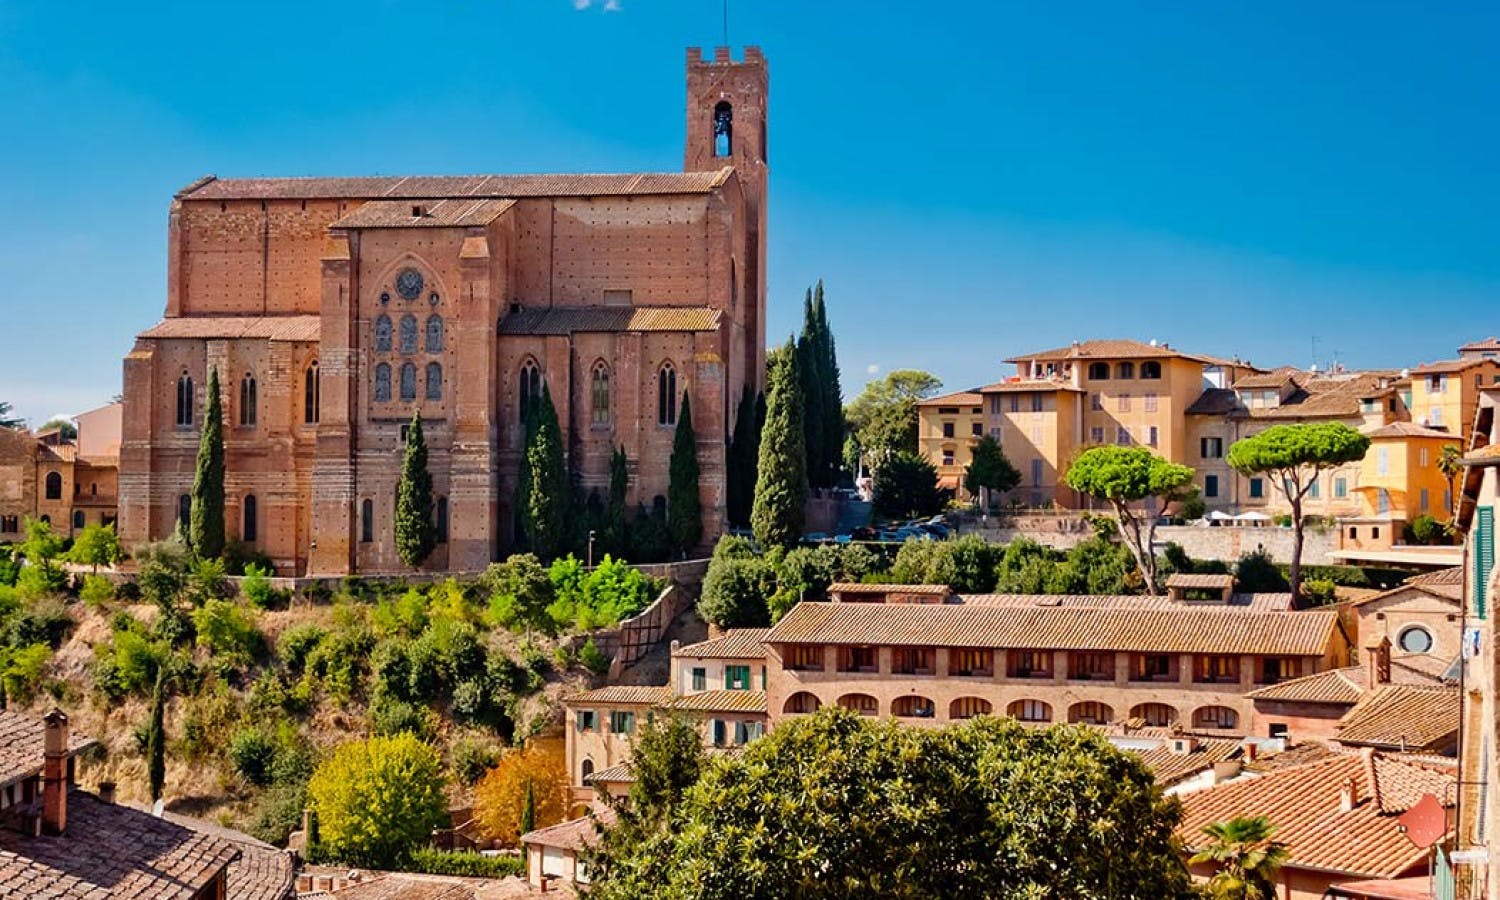 Siena, San Gimignano, Chianti and Monteriggioni: Guided Tour and Lunch with Local Products from Tuscany